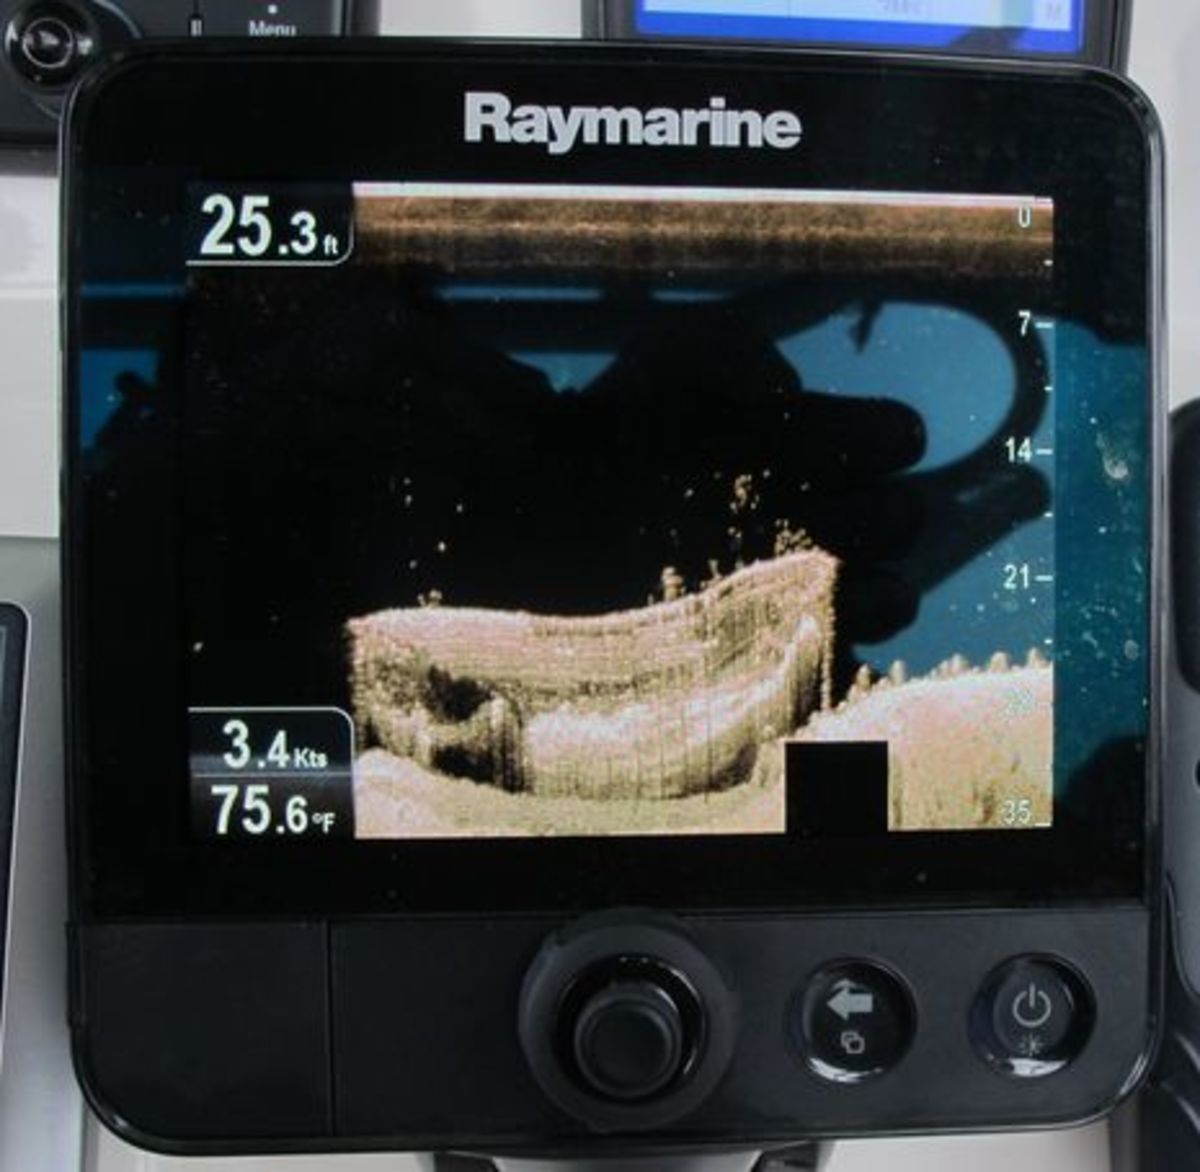 Raymarine_Dragonfly_Lady_of_the_Lake_wreck_cPanbo.jpg